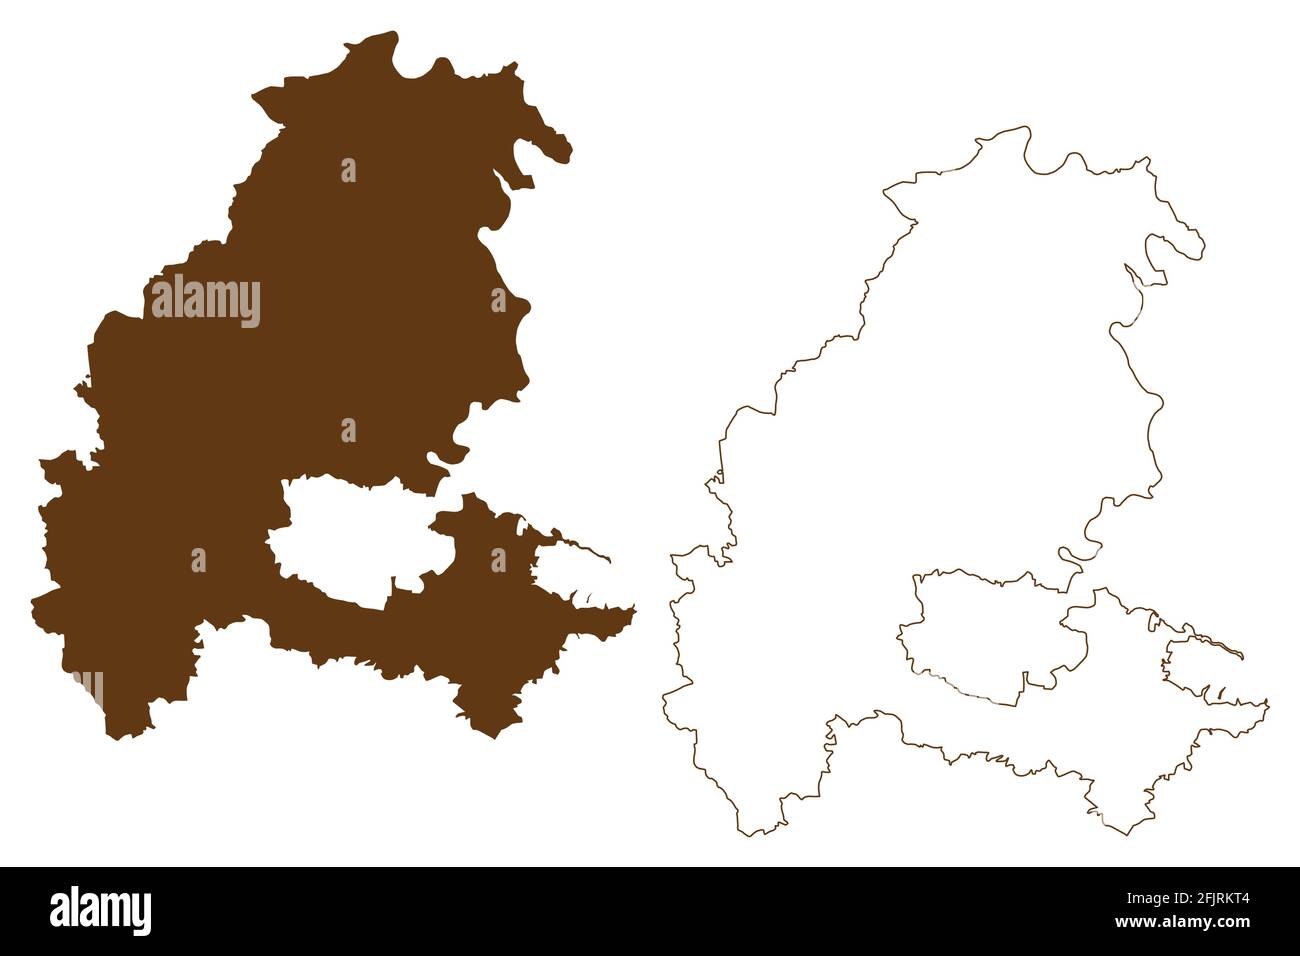 Kassel district (Federal Republic of Germany, rural district Kassel region, State of Hessen, Hesse, Hessia) map vector illustration, scribble sketch S Stock Vector